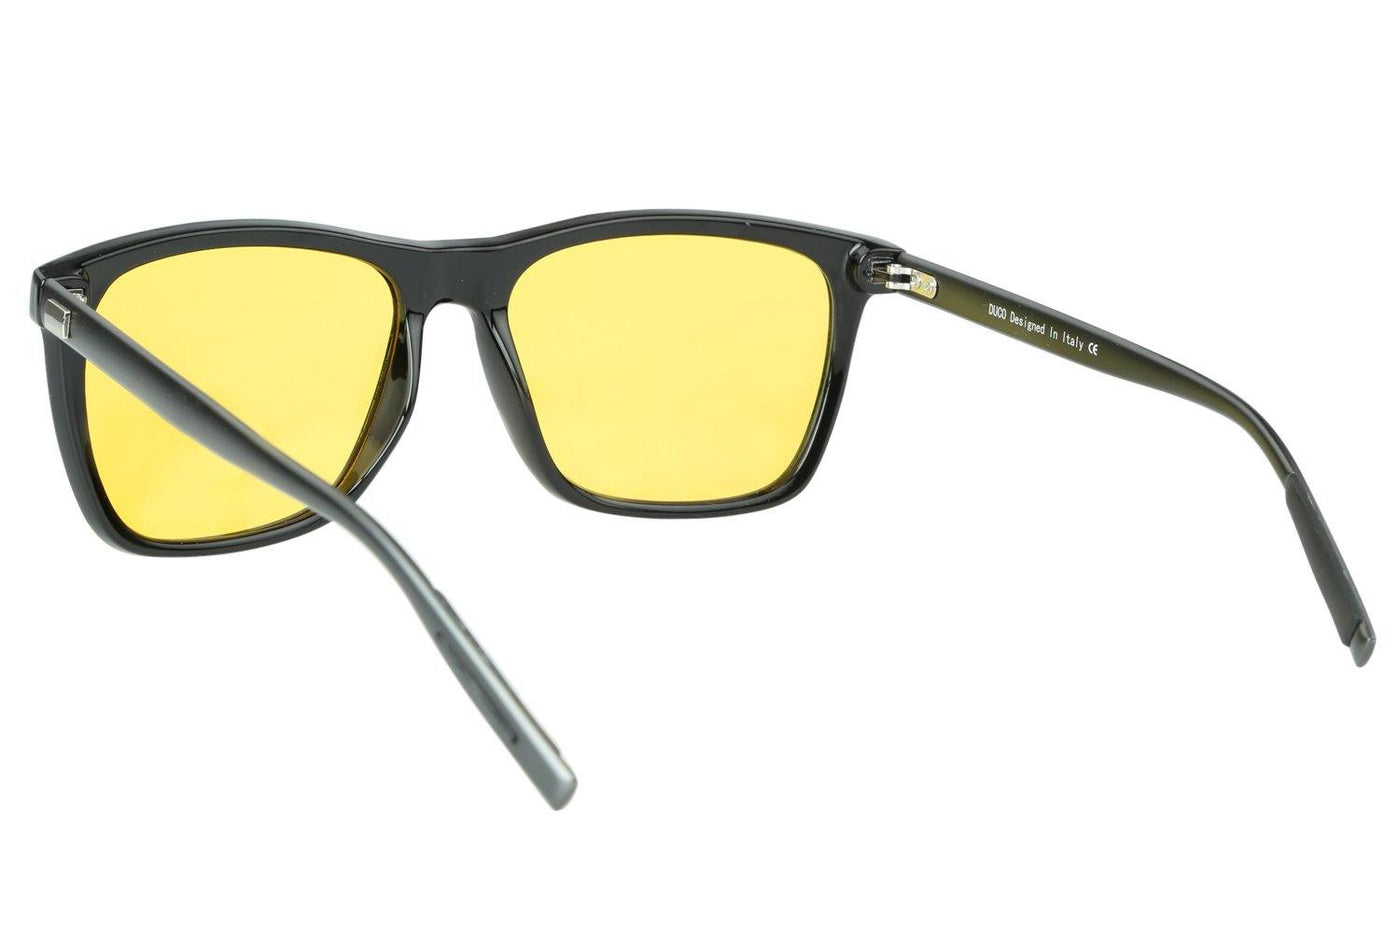 DUCO GLASSES-The right kind of shady Duco Night Driving Glasses for Headlight Anti-glare Night Time Yellow Lenses 3029 Duco Night Vision Glasses